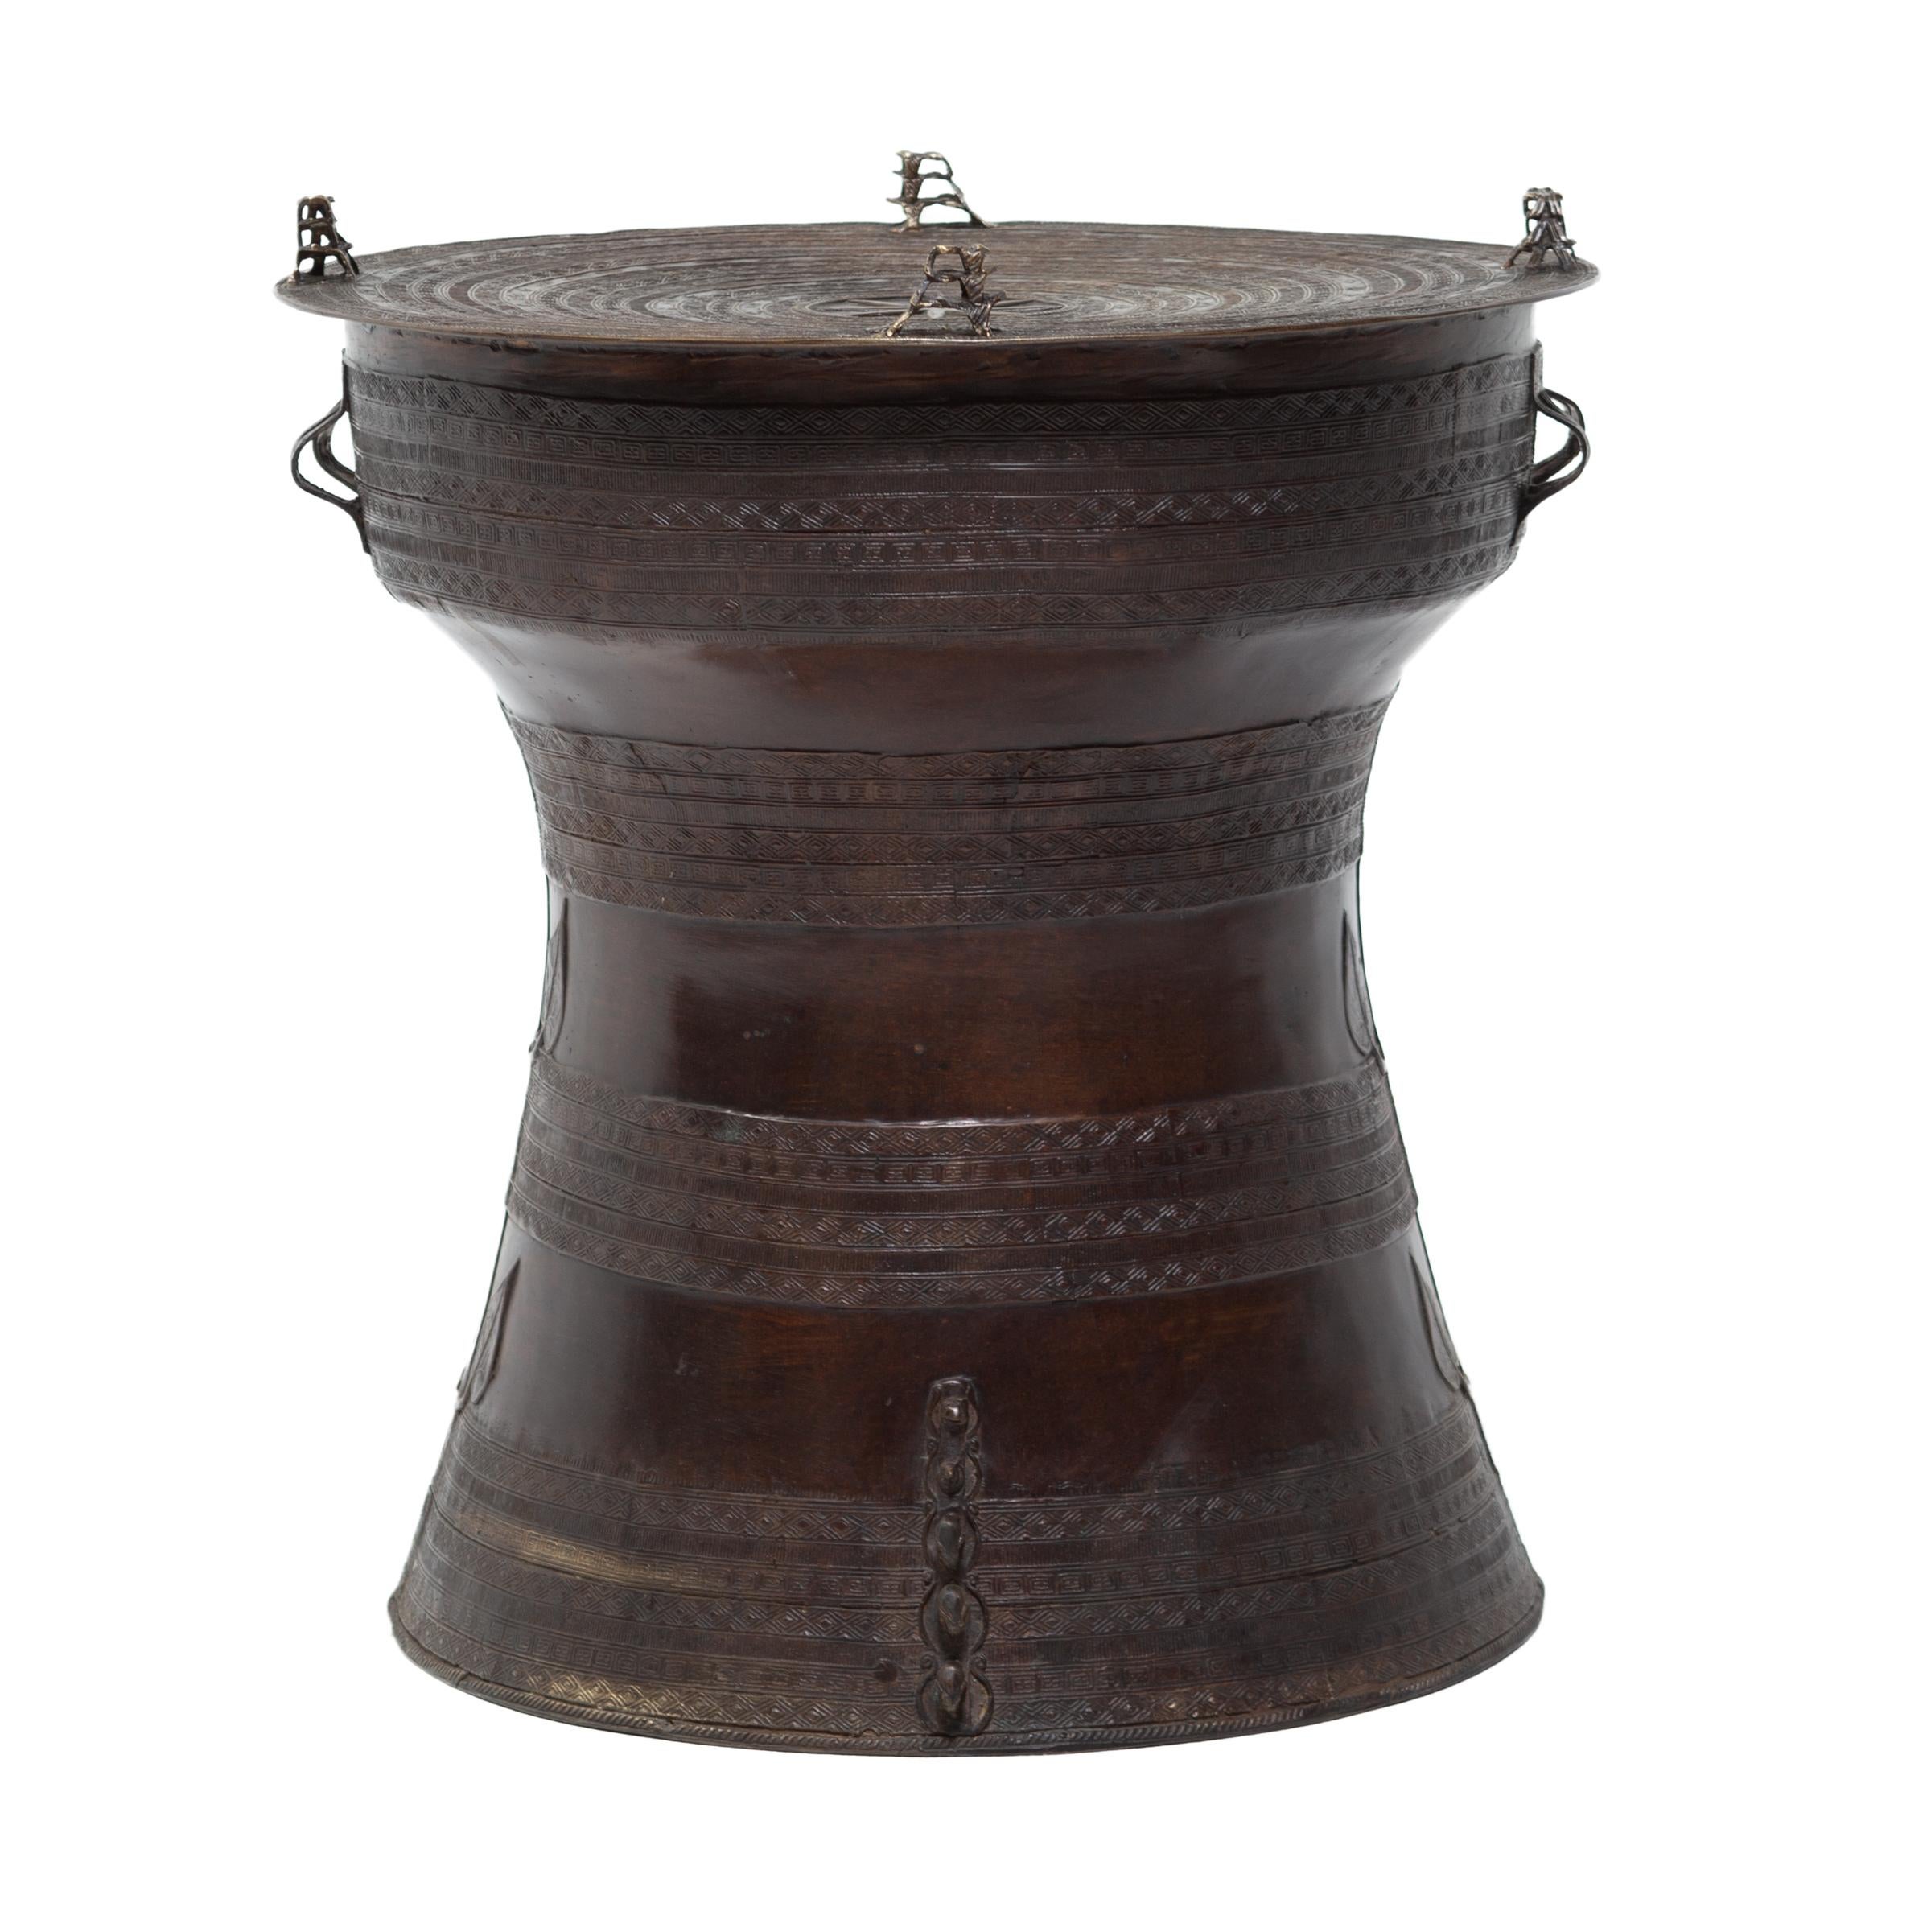 Based on forms created by the Dong Son culture of Vietnam as early as 600 BCE, this cast bronze rain drum continues tradition with beautiful precision. Created by artisans of the Karen culture of Burma and northern Thailand, bronze rain drums were